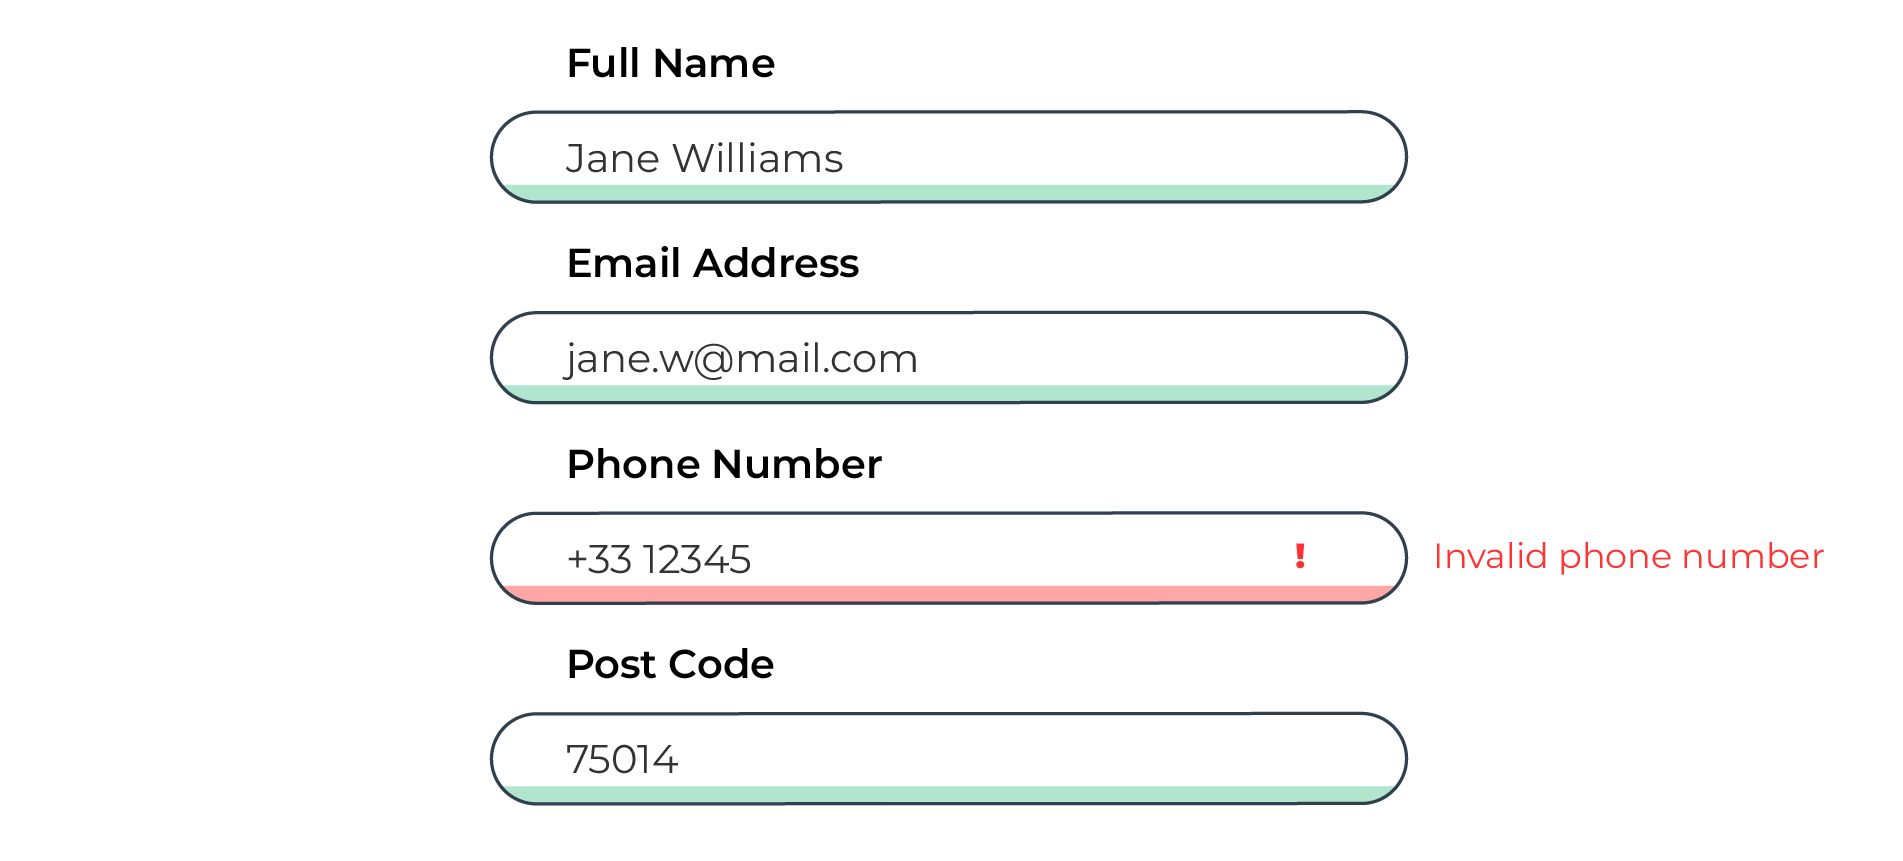 A form with an incorrectly filled out field marked in red. but a visual error icon and written message support the color coded information.